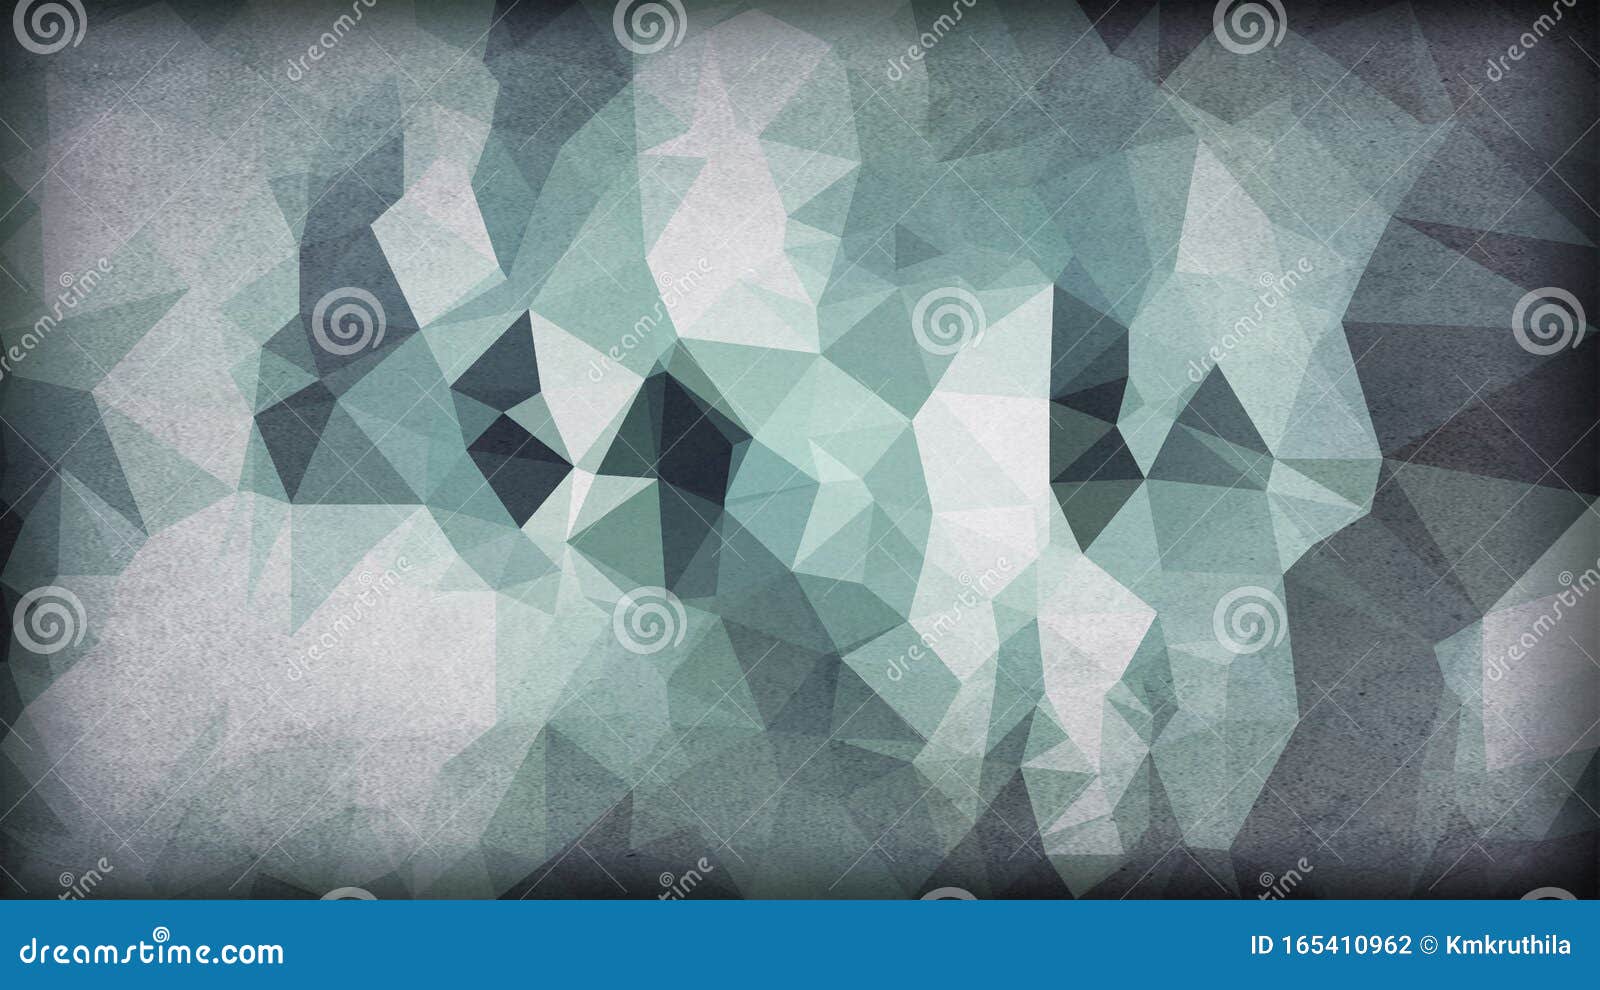 Blue and Grey Distressed Polygon Pattern Background Stock Photo - Image ...